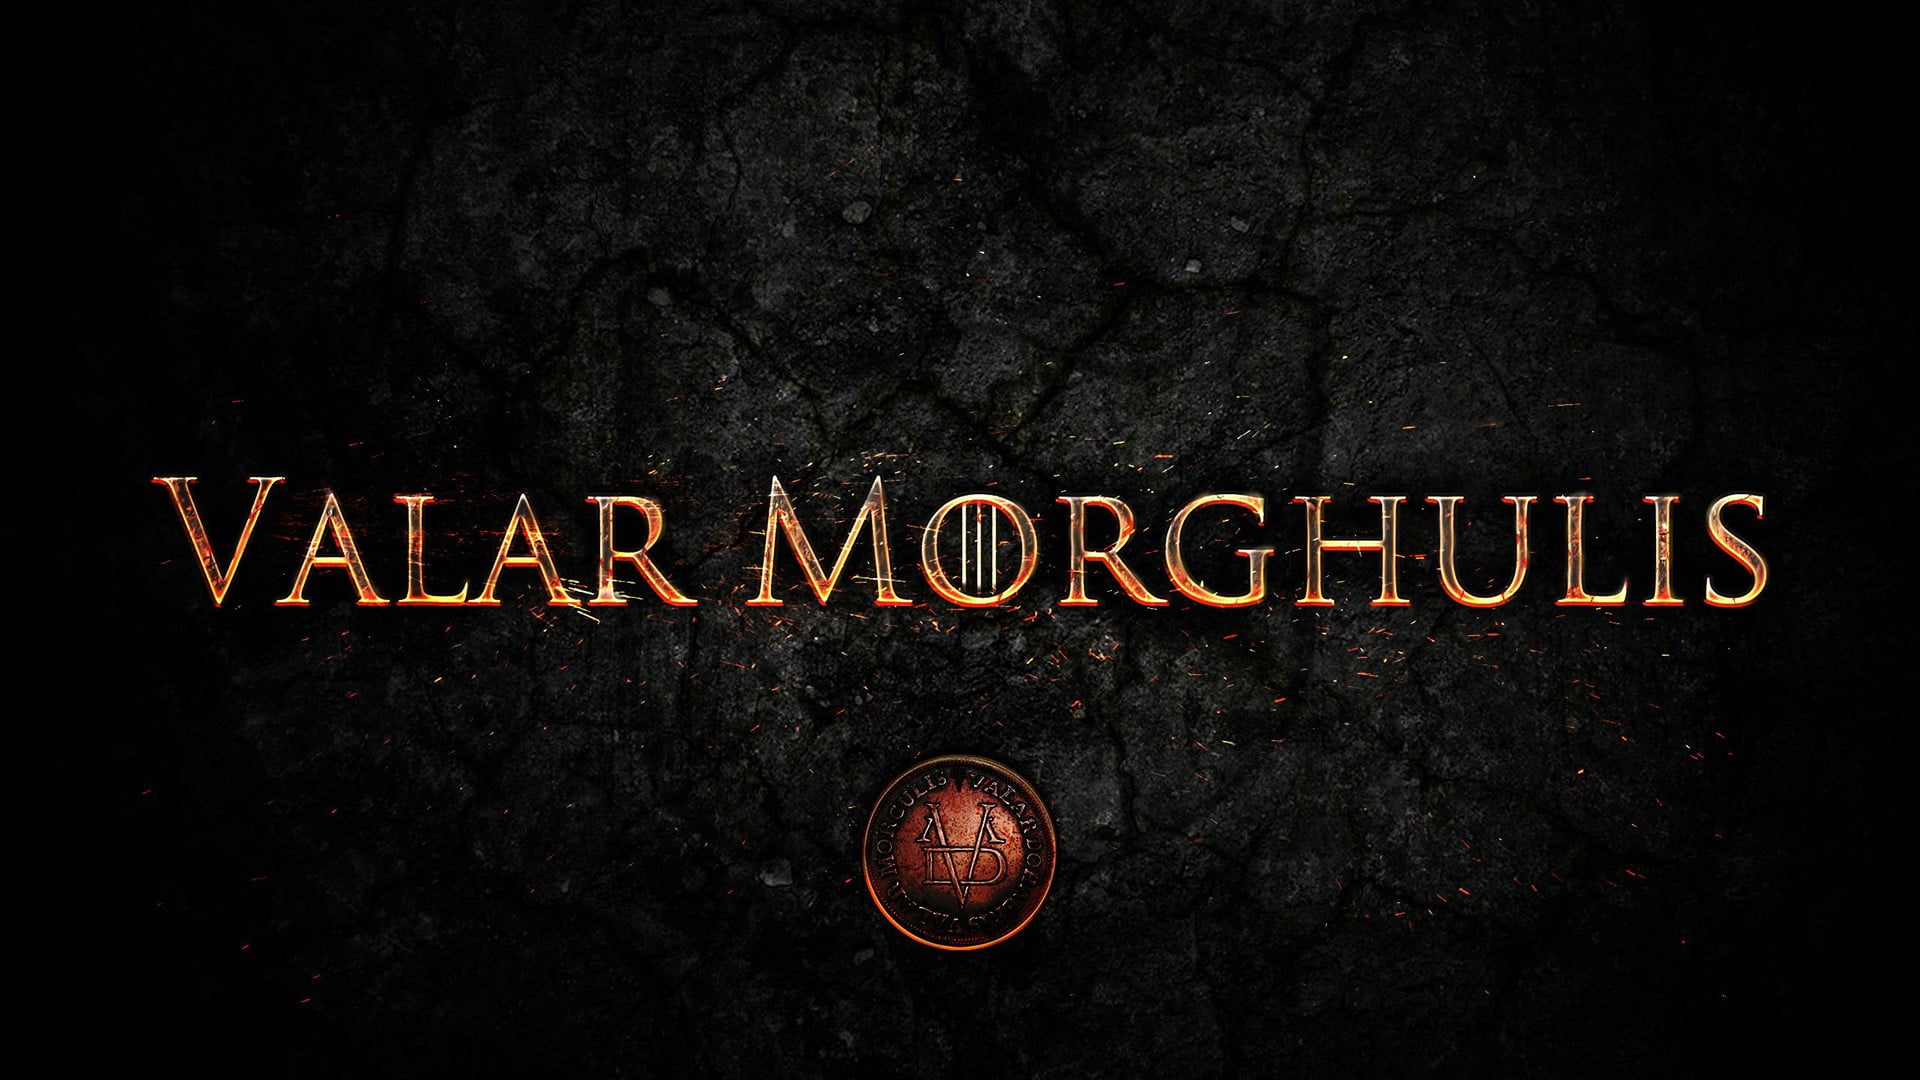 black background with text overlay, Game of Thrones, Valar Morghulis